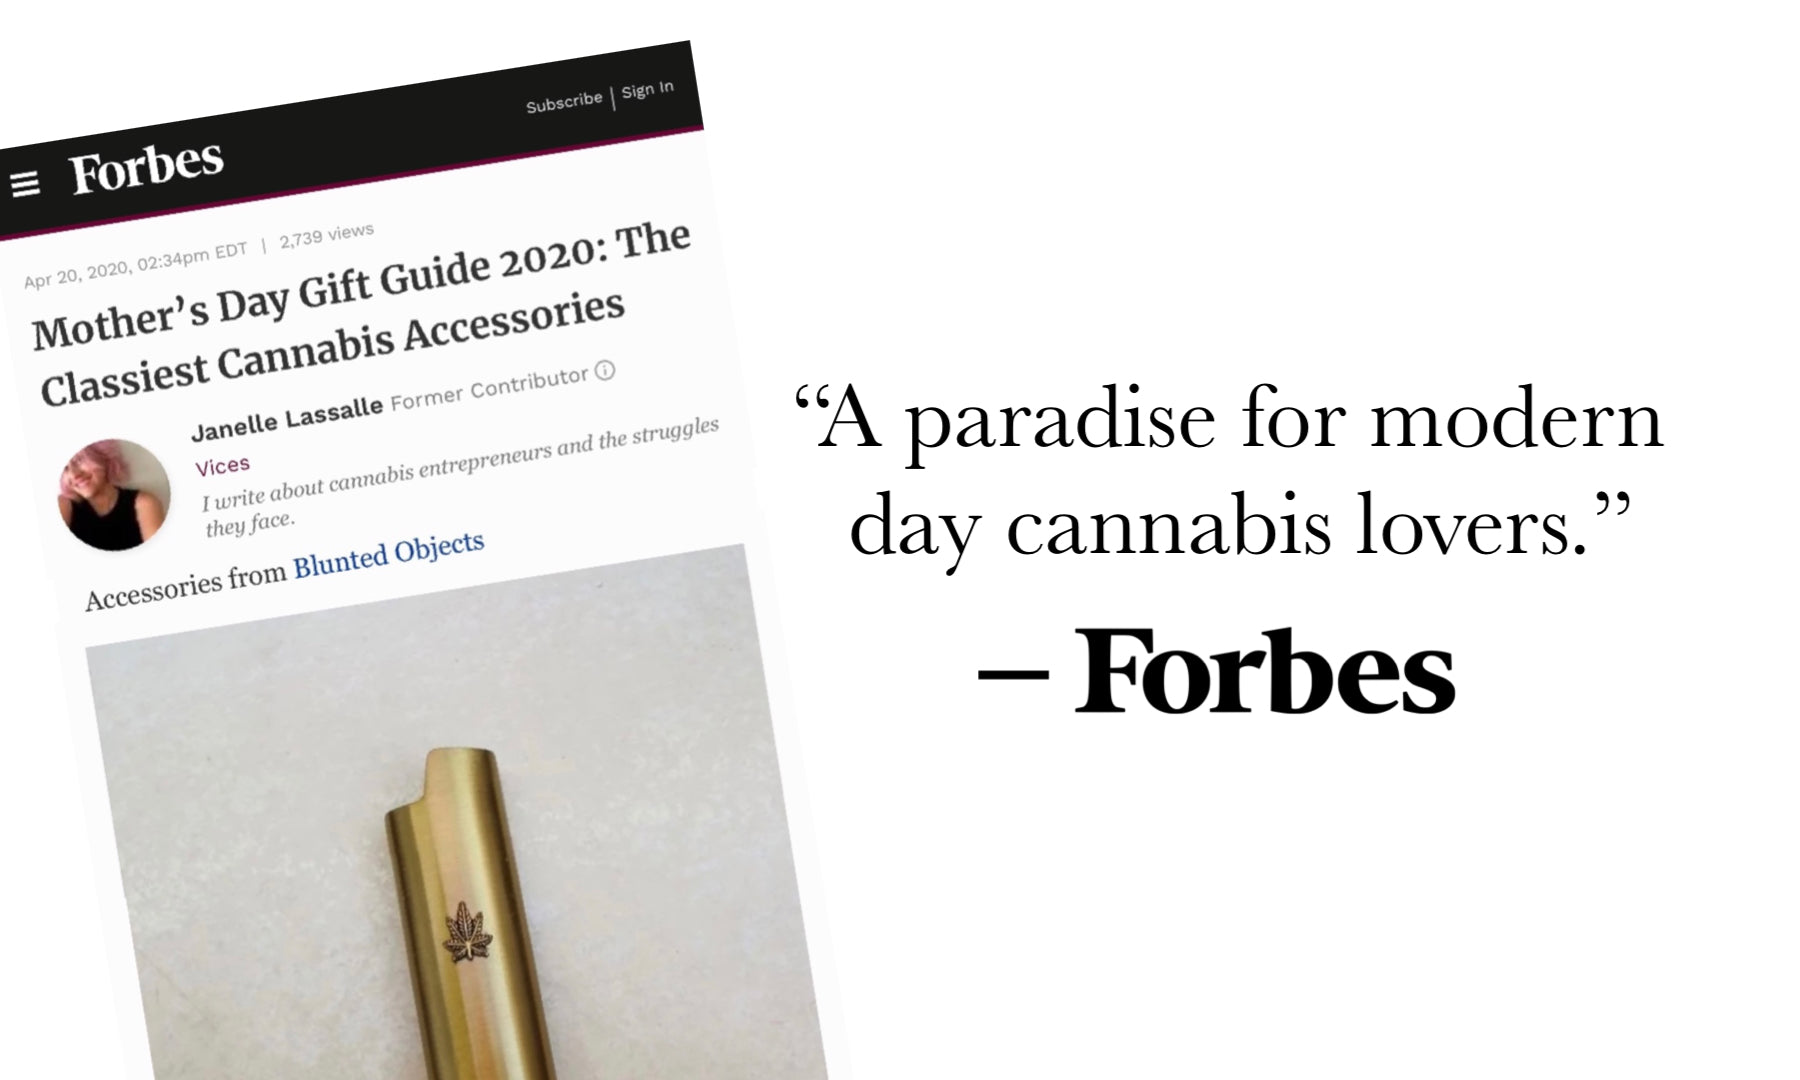 Forbes, "Mother’s Day Gift Guide 2020: The Classiest Cannabis Accessories"